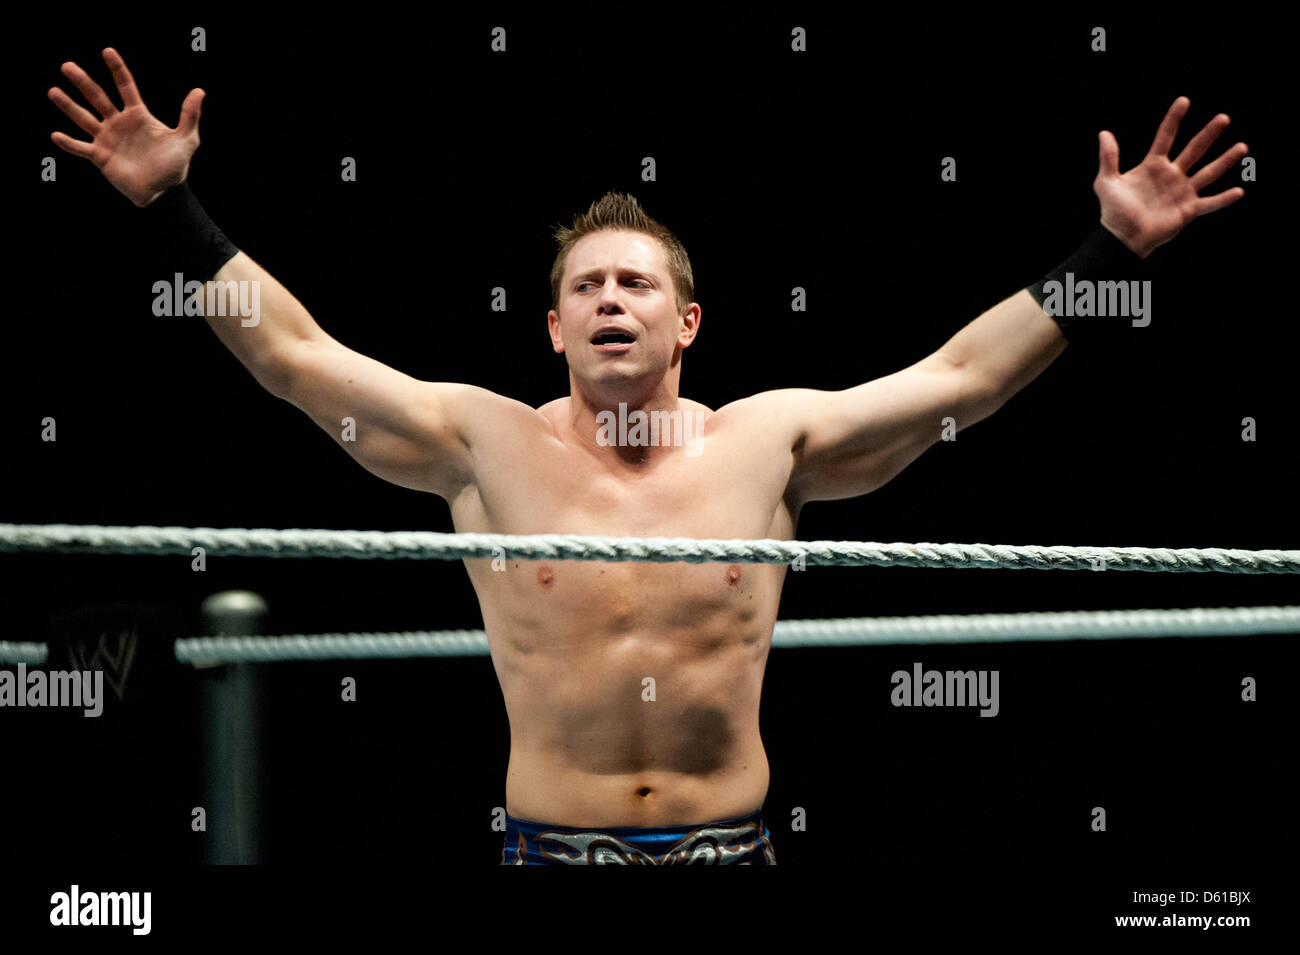 US-wrestler The Miz shouts and gestures prior to a fight at the RAW WrestleMania Revenge Tour at the o2 World canue in Berlin, Germany, 14 April 2012. The WWE (World Wrestling Entertainment) celebrates its 20th German anniversary this April. The first show in Germany was staged in Kiel, Germany, in April 1992. Photo: Sebastian Kahnert Stock Photo